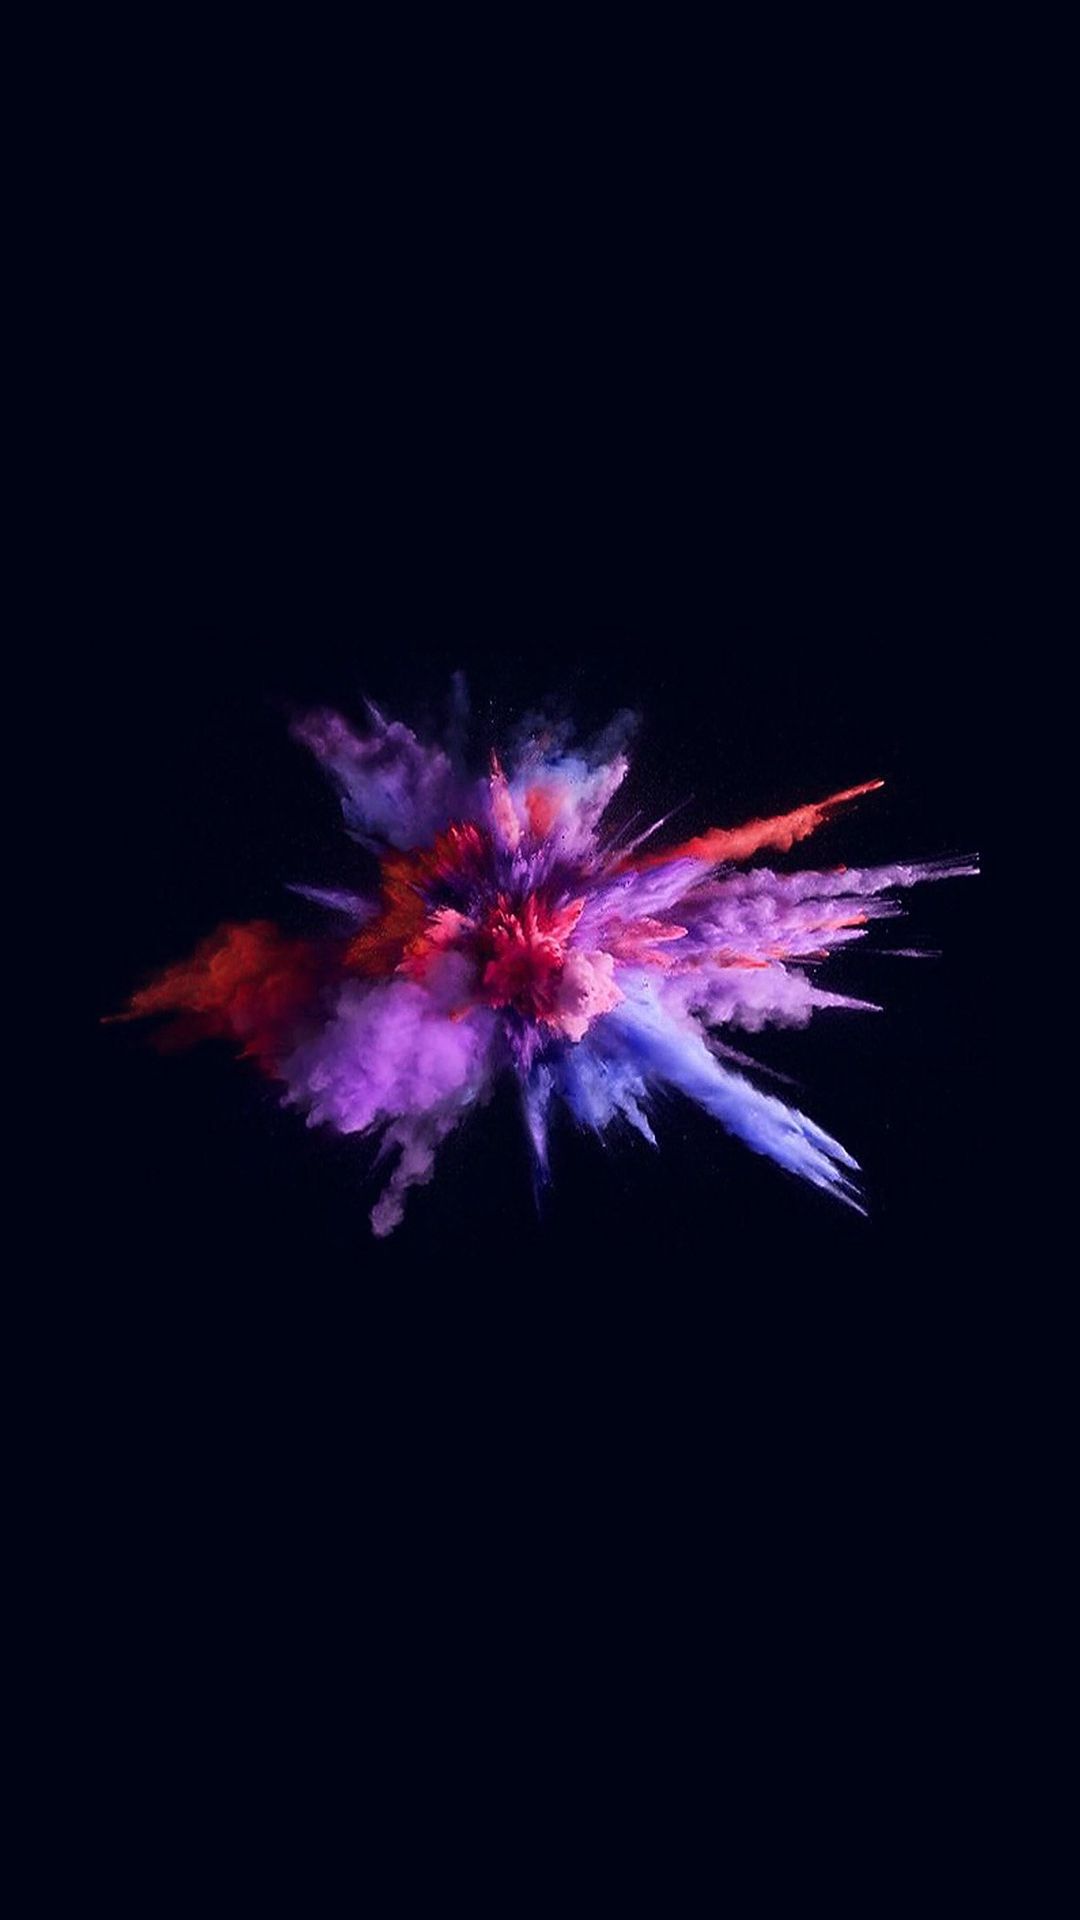 Best Explosion iPhone 8 Wallpapers HD [2020]